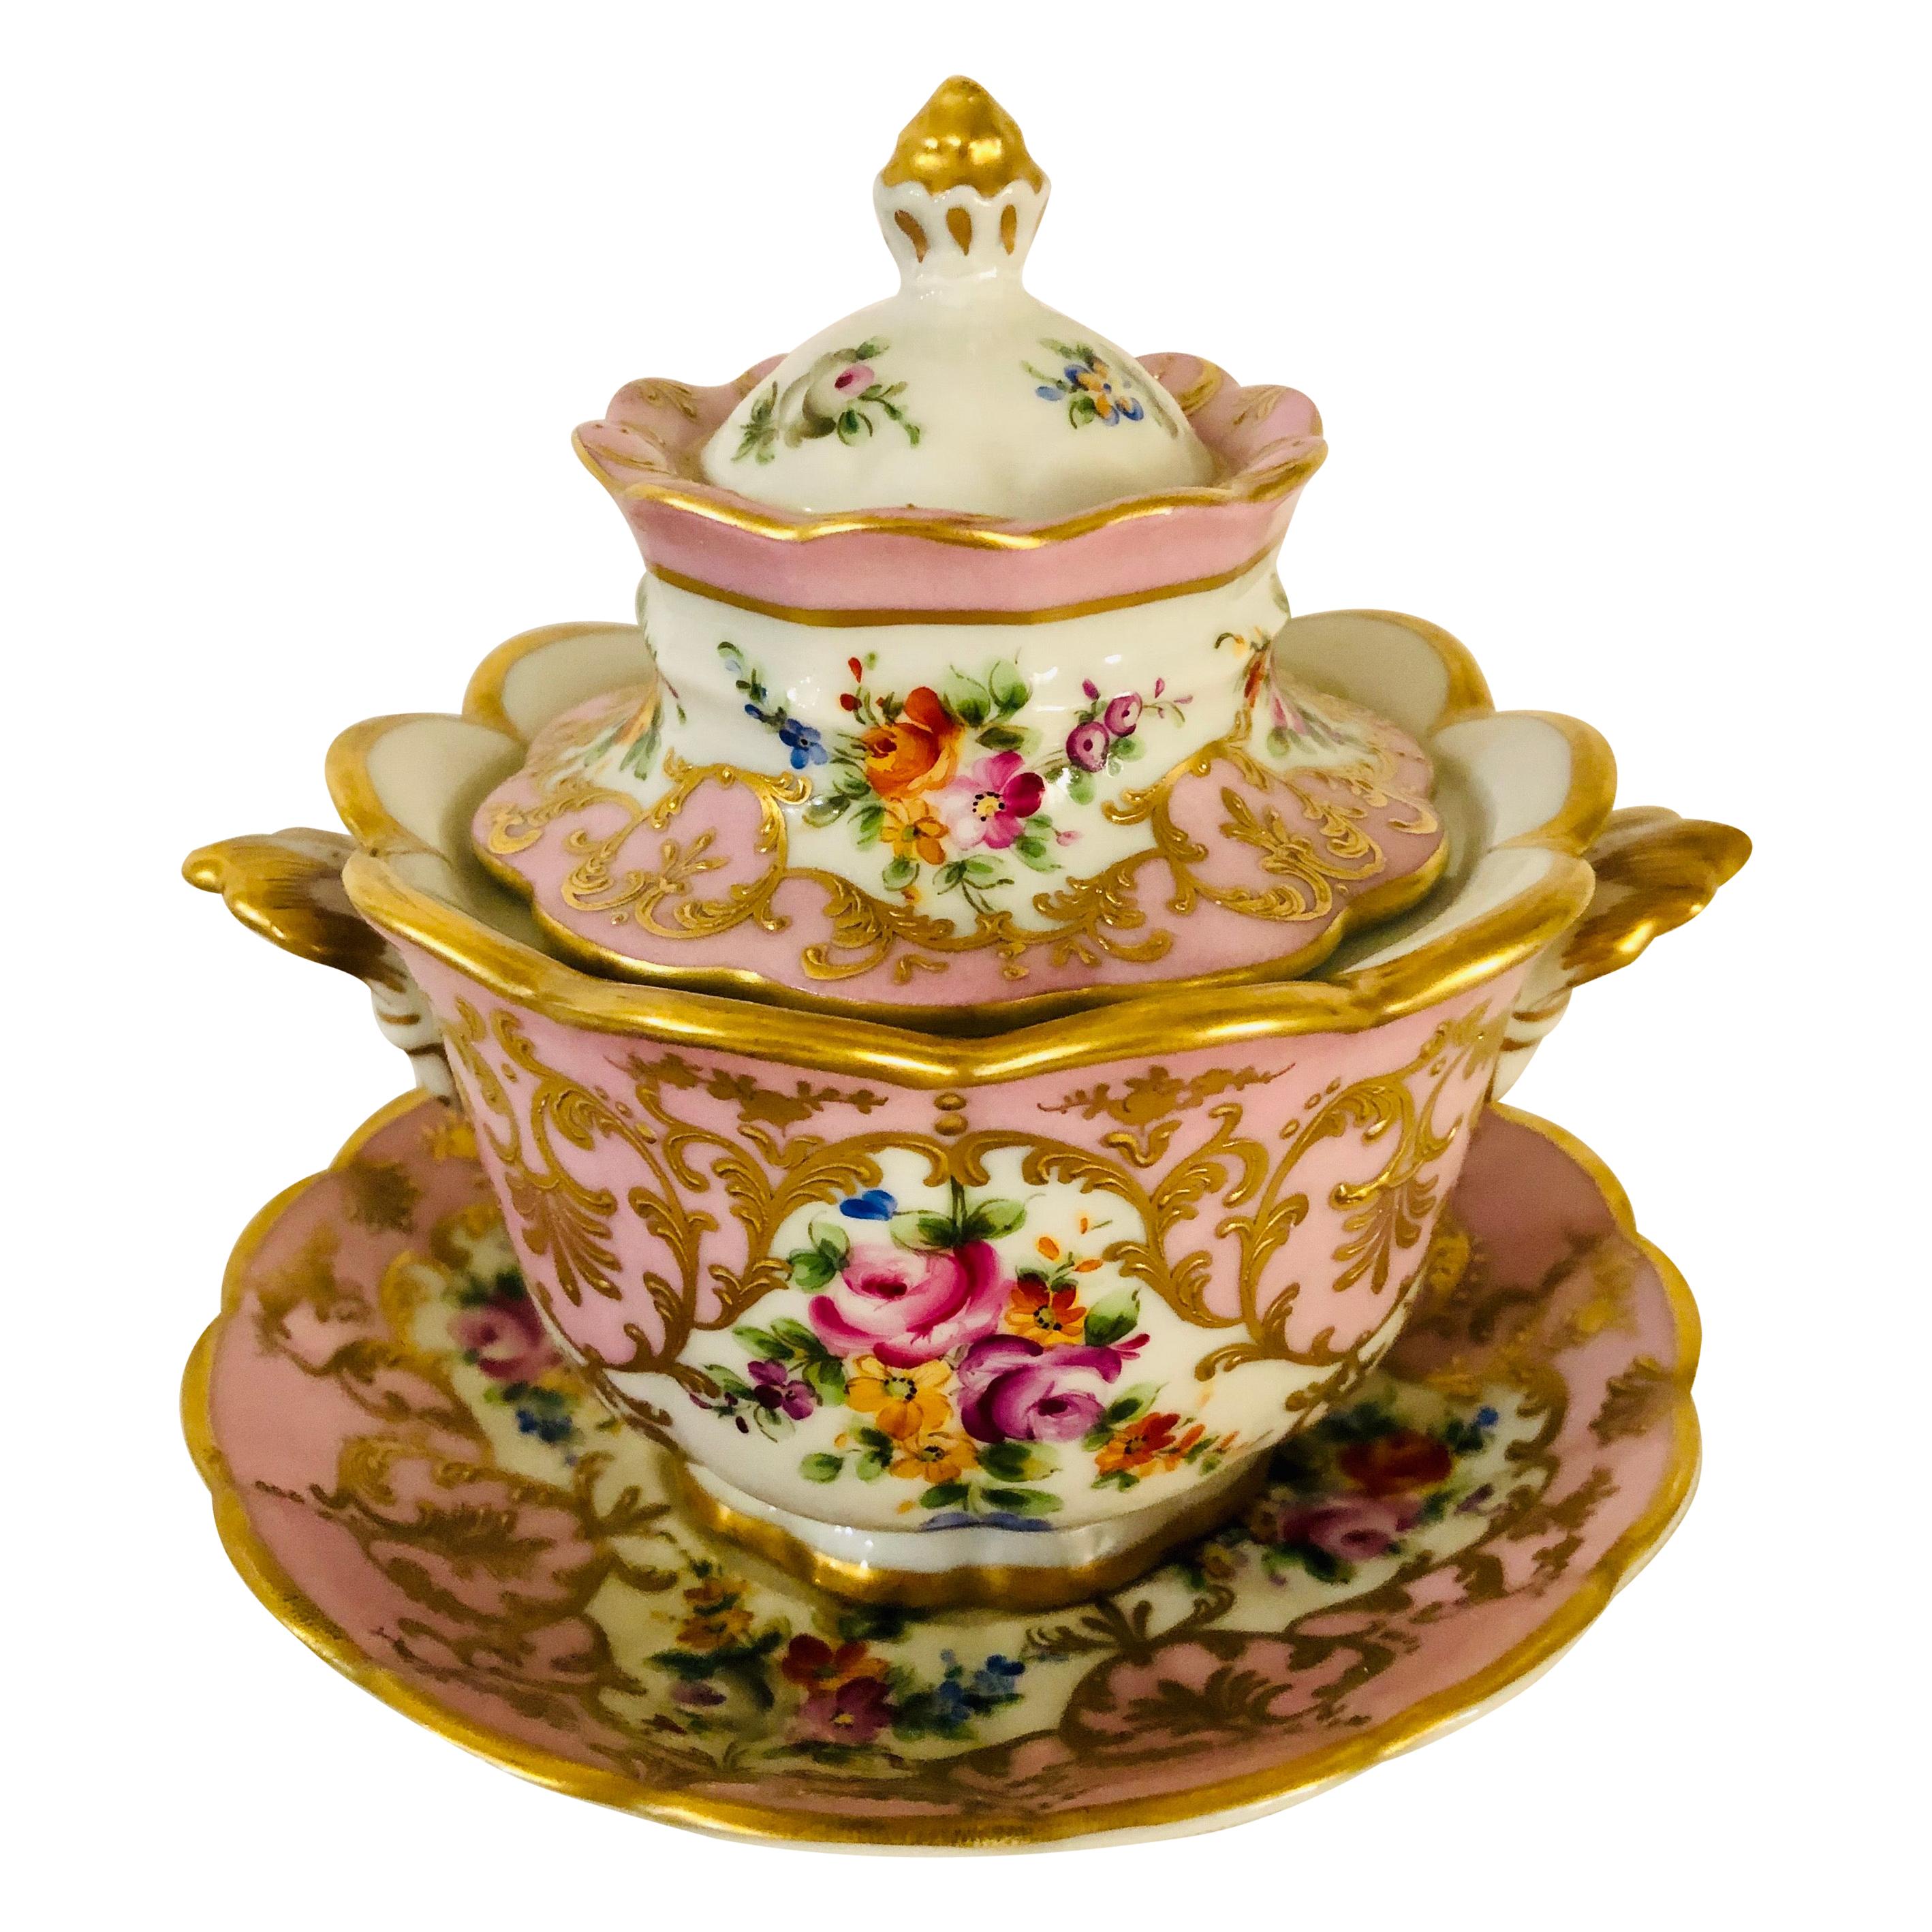 Le Tallec Pink Covered Bowl with Flower Bouquets & Raised Gold Embellishments